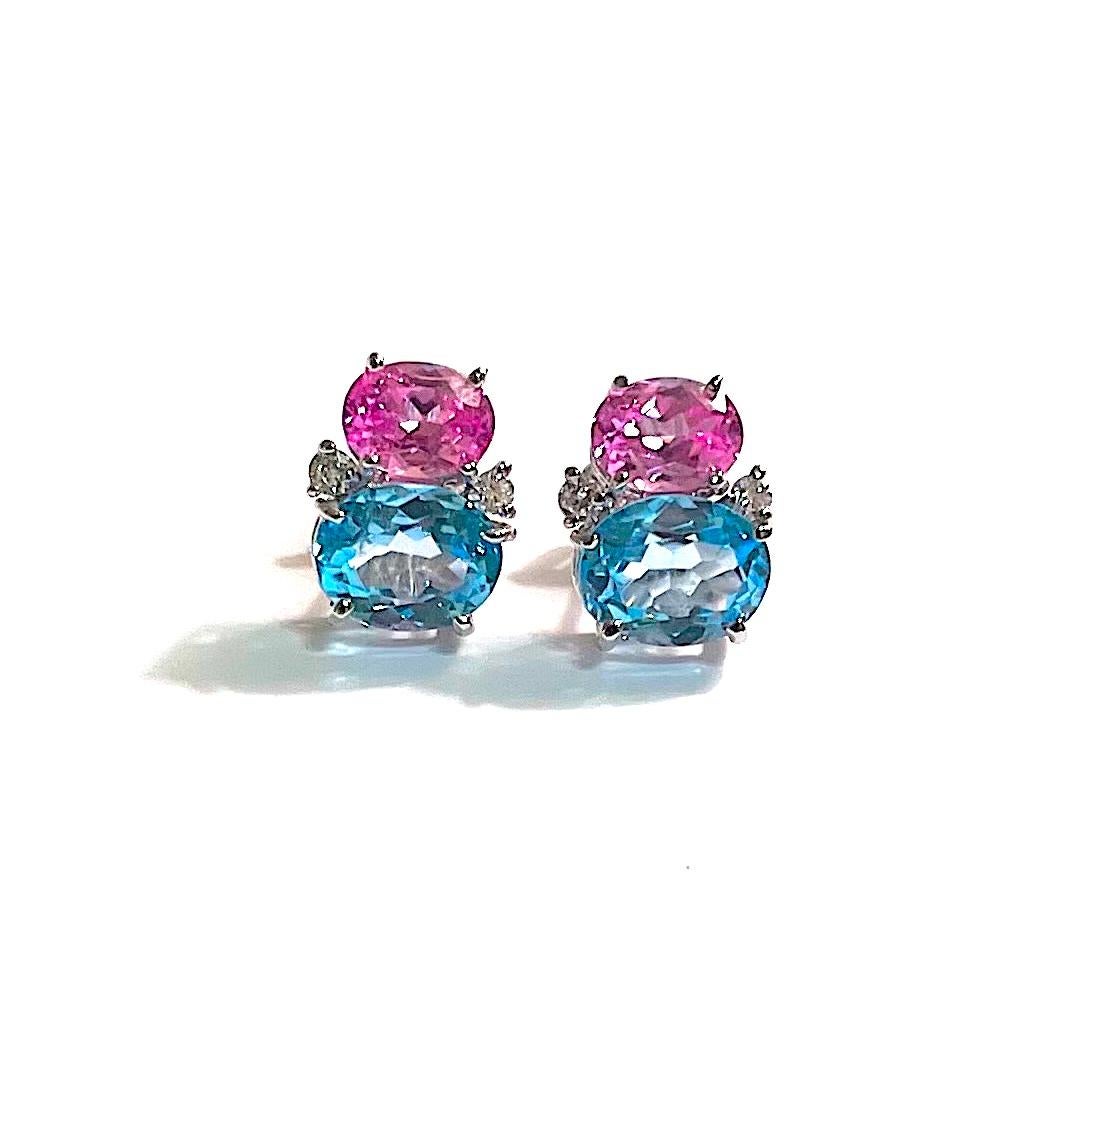 Mini 18kt White gold GUM DROP™ earrings with faceted Pink Topaz (approximately 2 cts each), Faceted Blue Topaz (approximately 3 cts each), and 4 diamonds weighing ~ 0.20 cts.  

Specifications: Height: 5/8